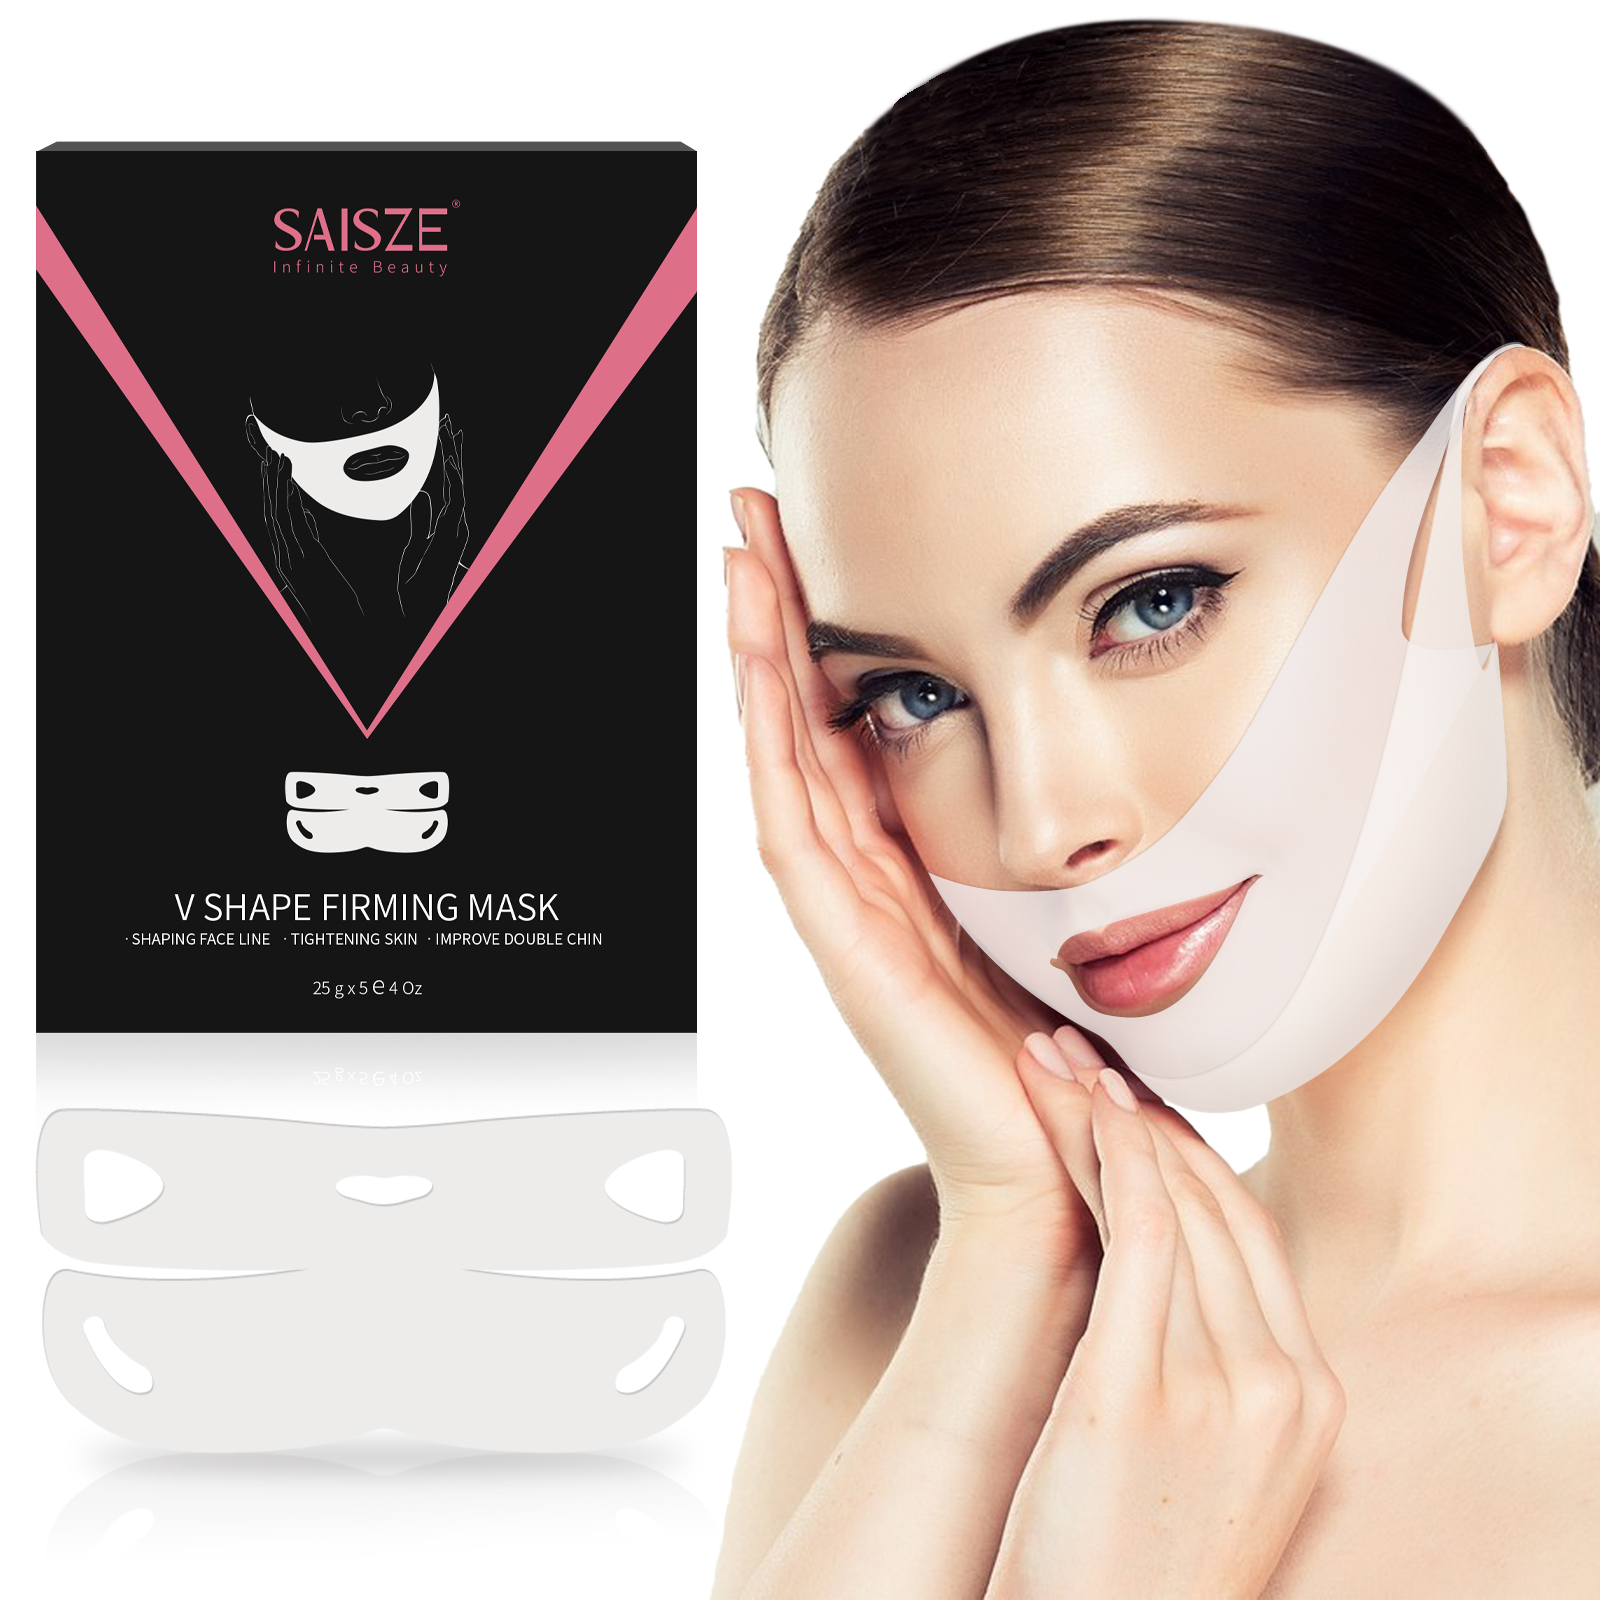 Saisze 5 Pcs V Shaped Facial Masks, V Line Chin Lift Patch, Chin Up Tightening Mask, Great for Chin Up & V Line, Double Chin Reduce, Firming Moisturizing & Contour Lifting - image 1 of 6